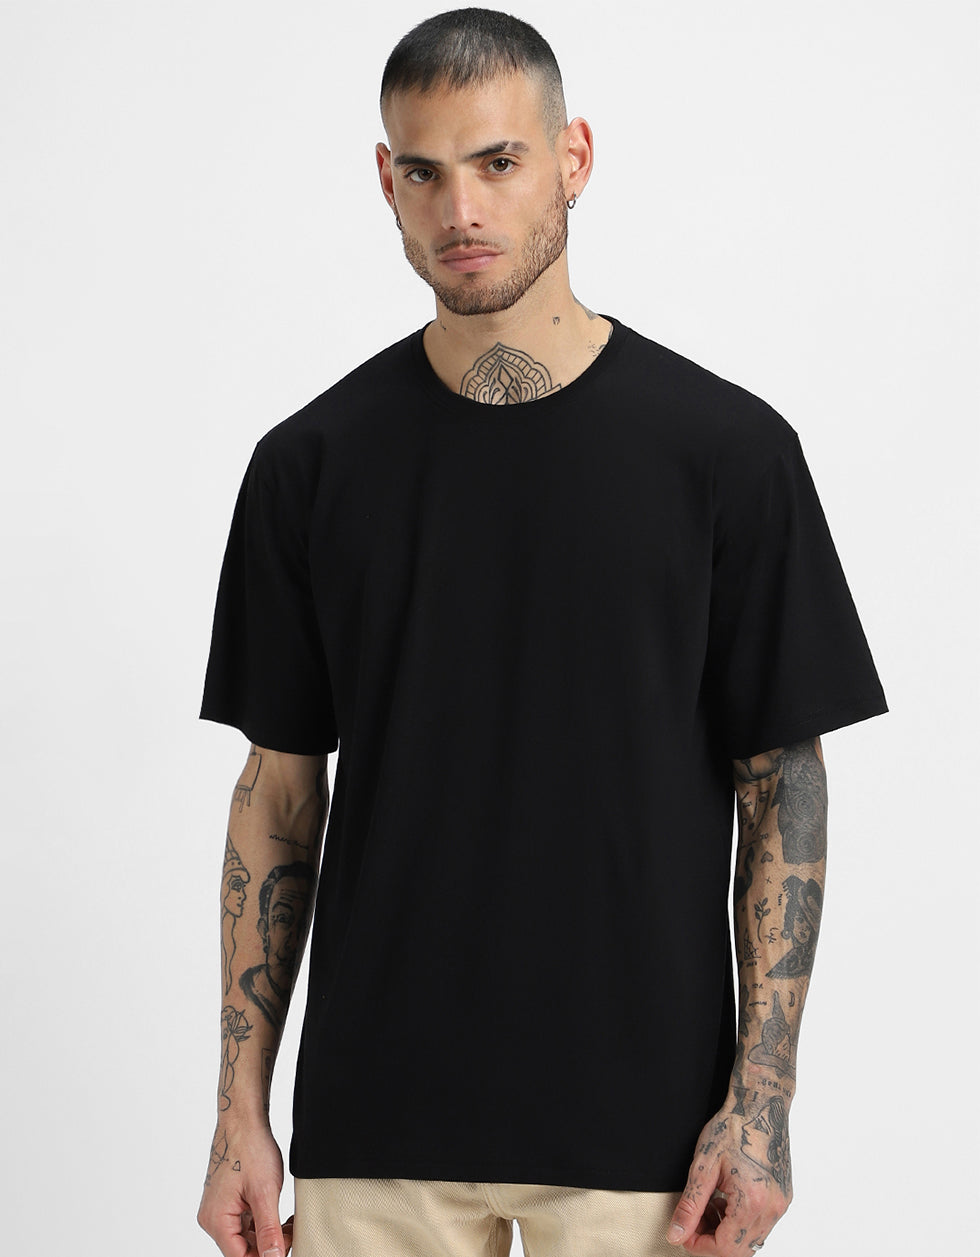 YOUNG BLOOD Printed Black Oversized Back Graphic Printed Tshirt